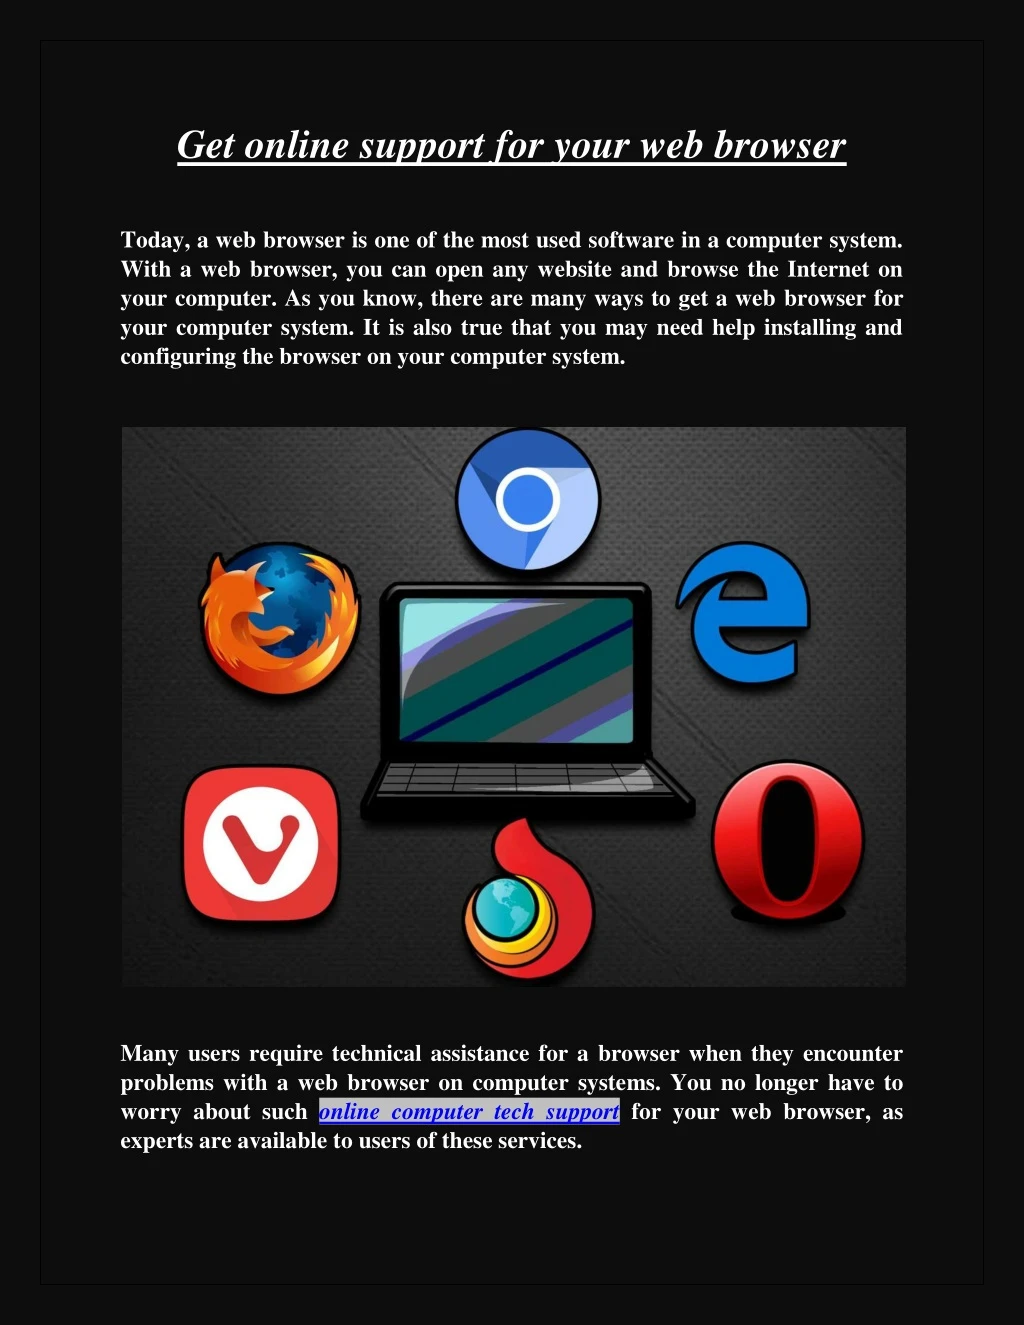 get online support for your web browser